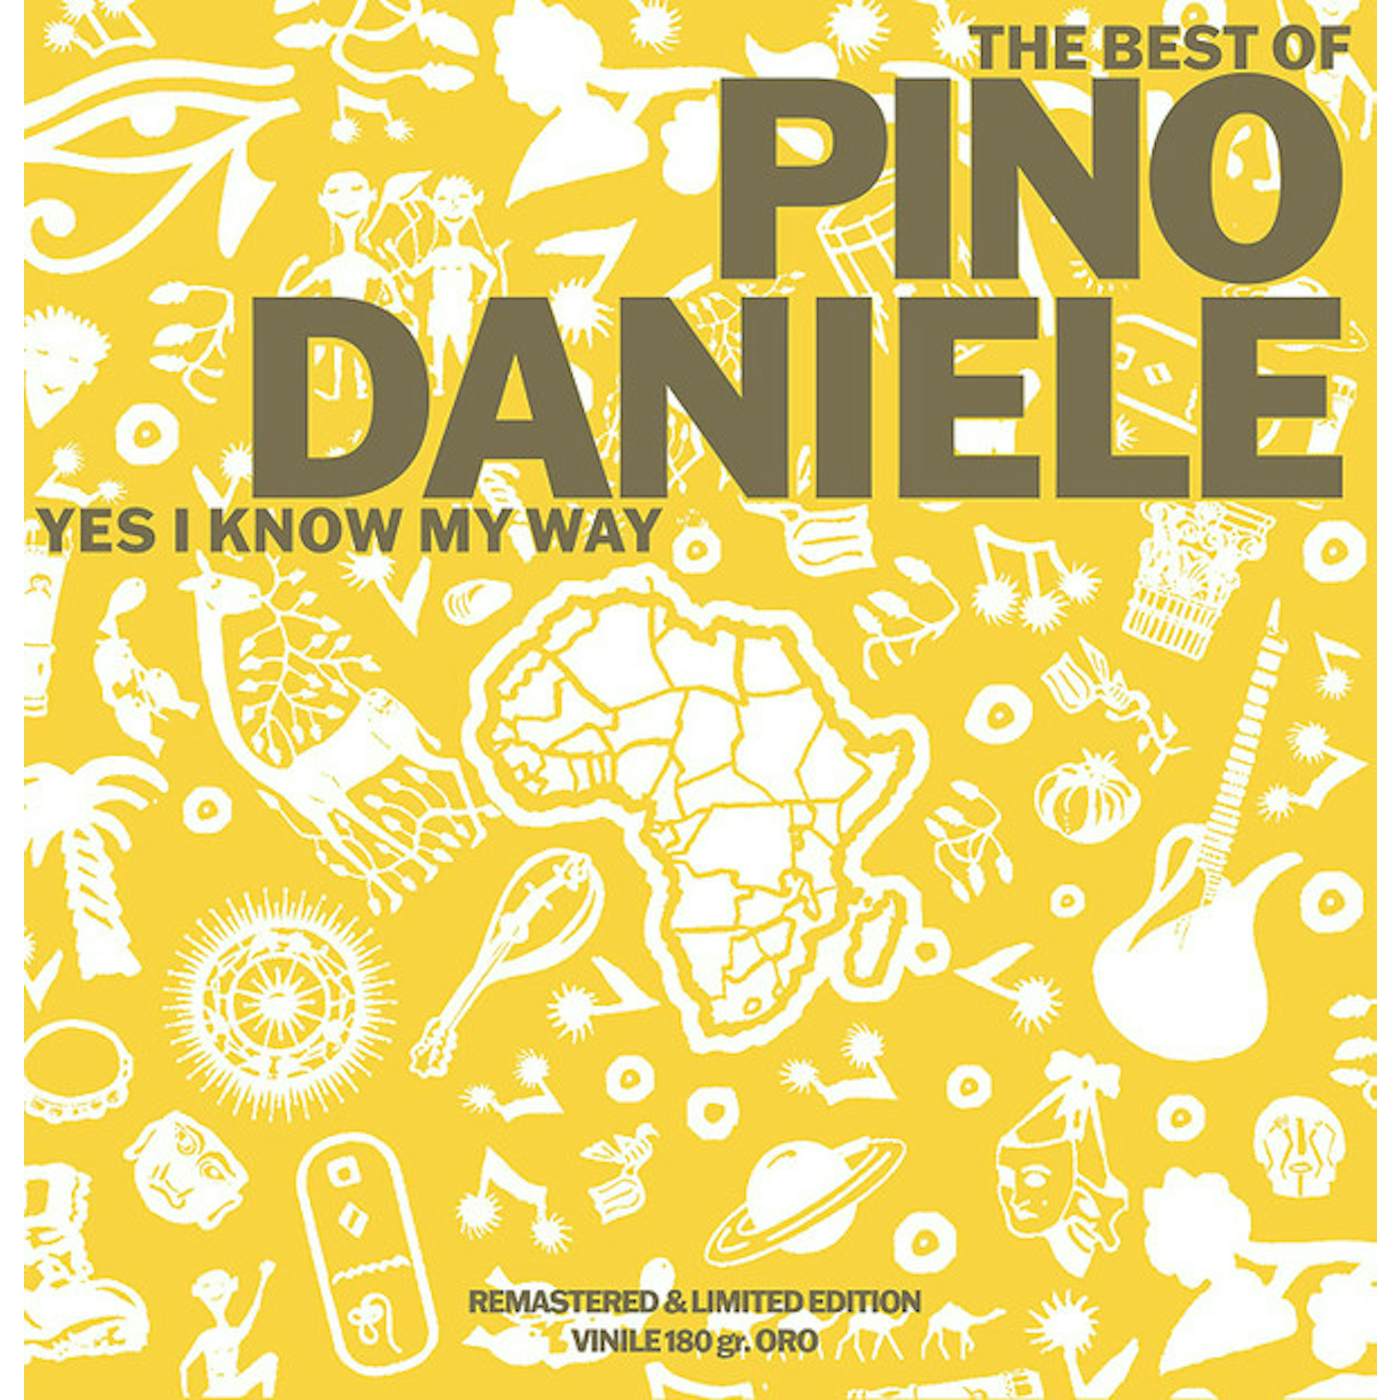 Pino Daniele YES I KNOW MY WAY: BEST OF Vinyl Record